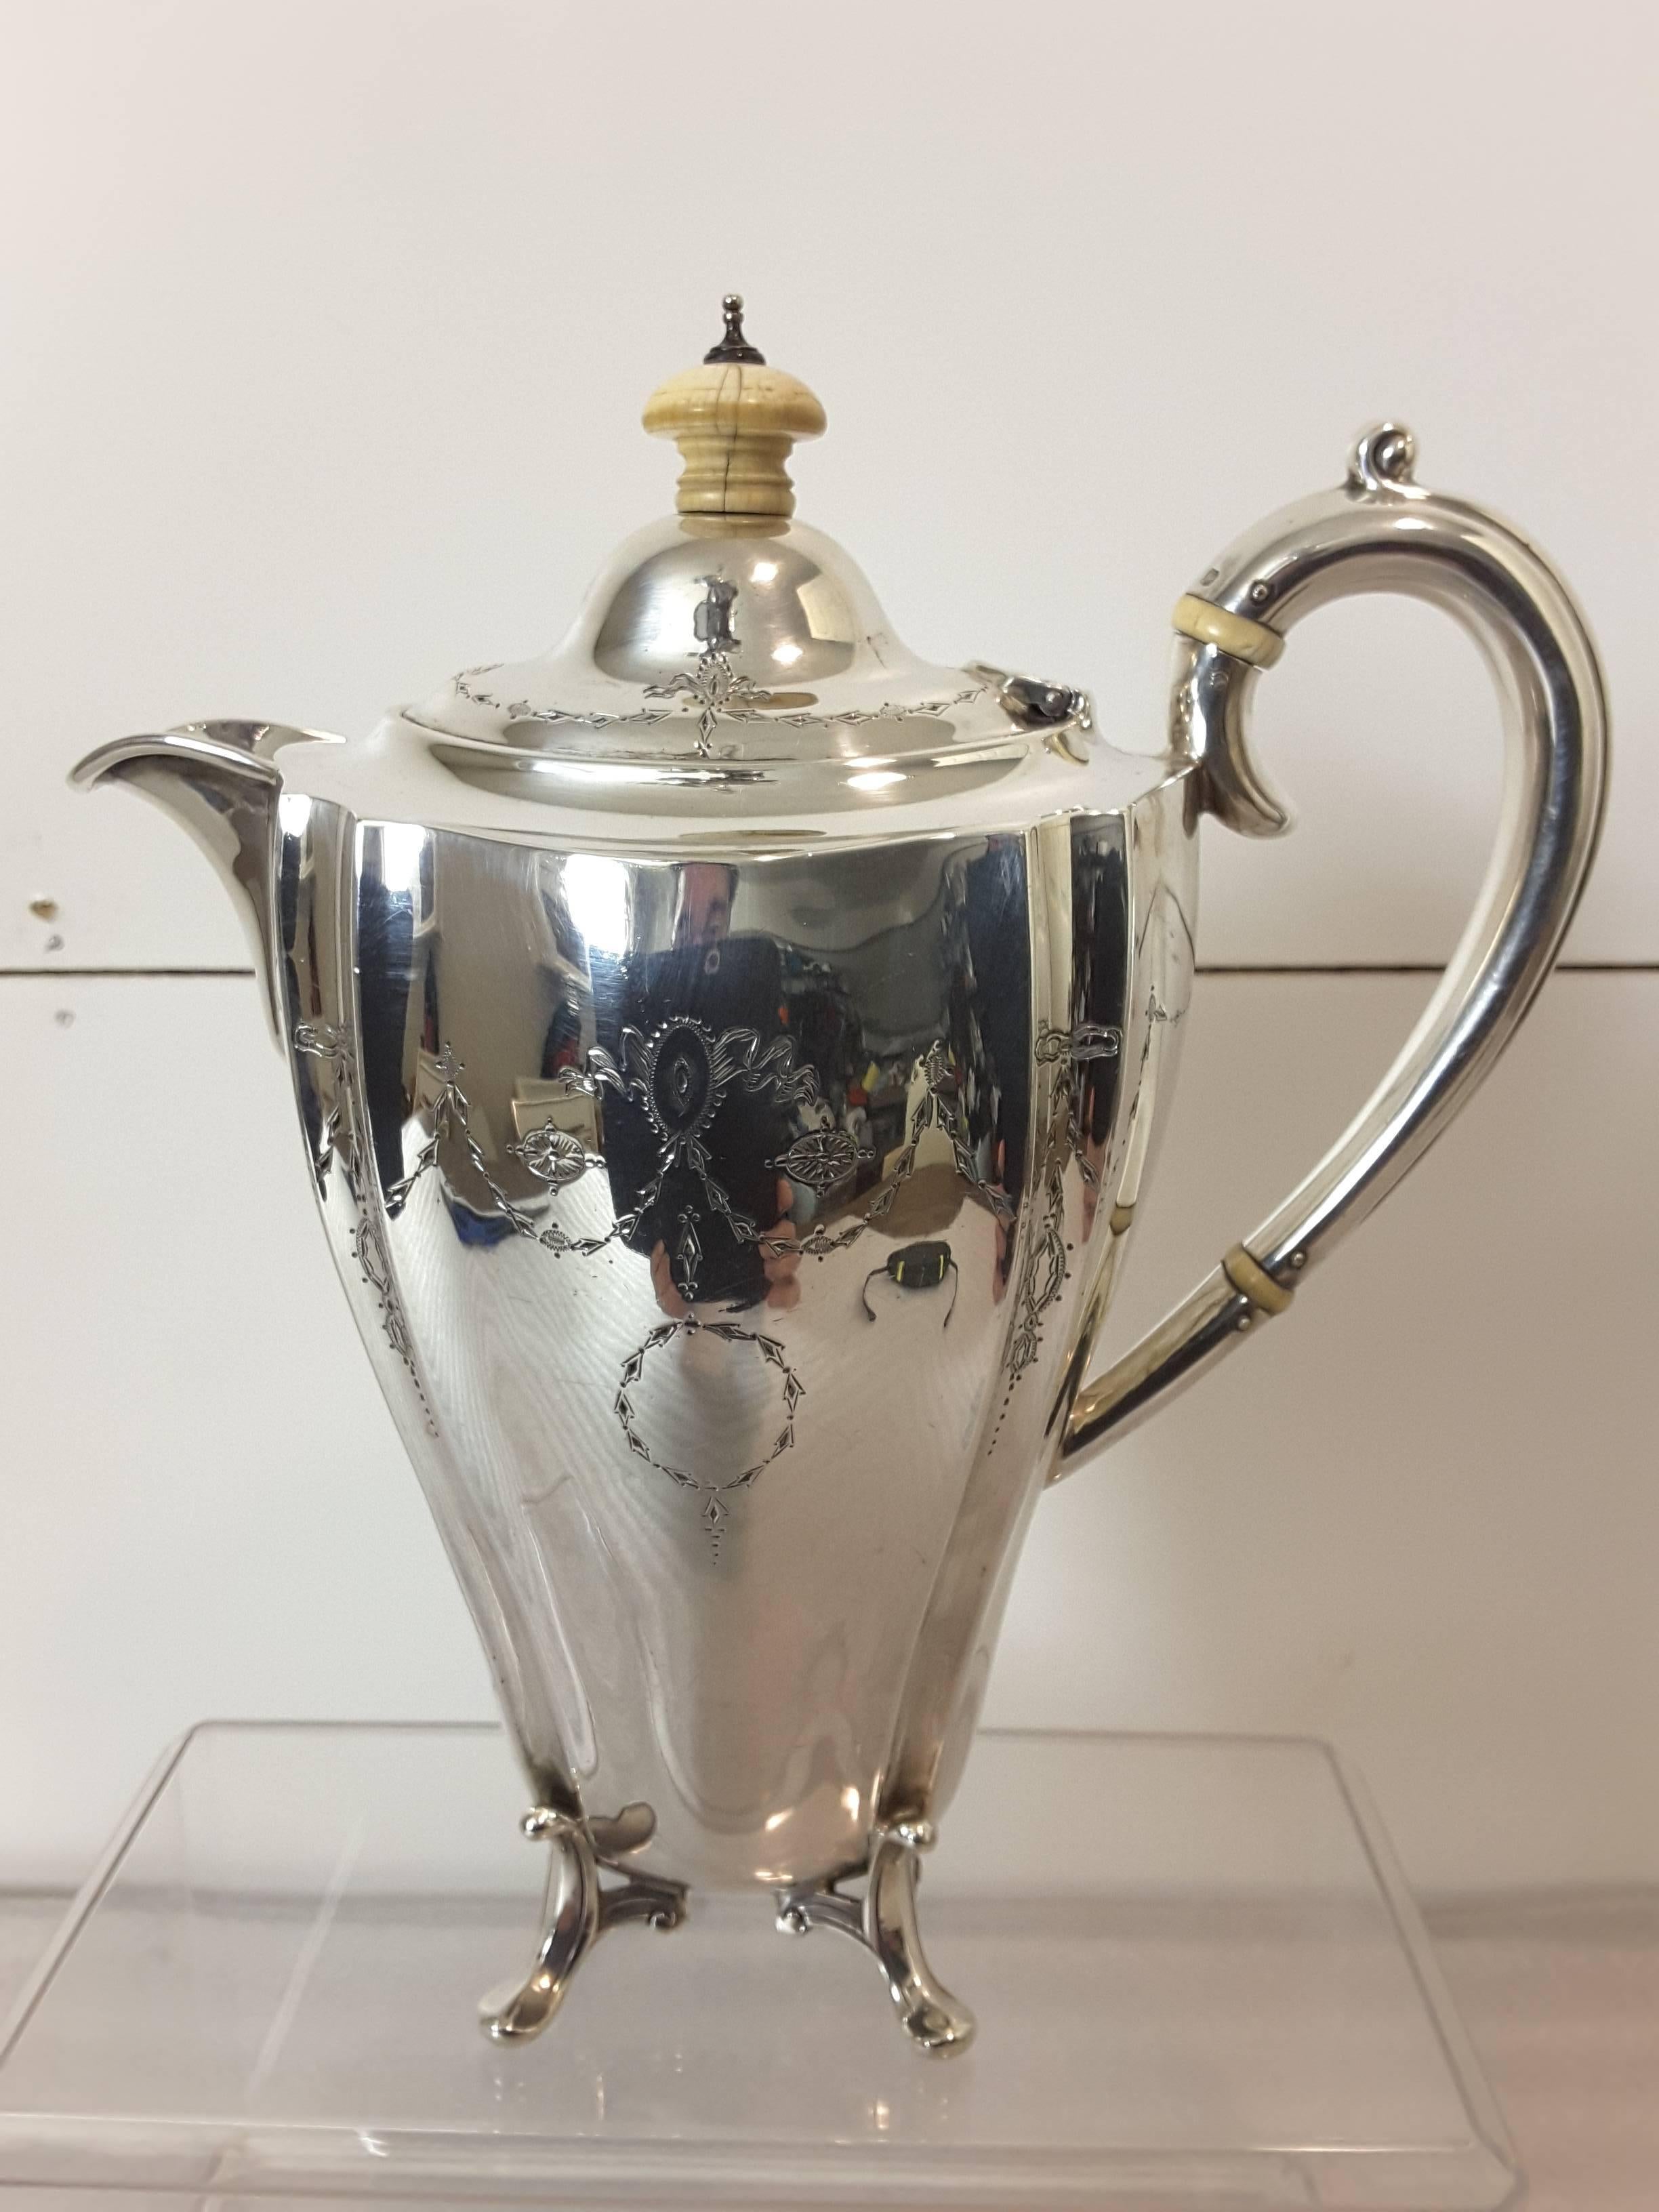 20th Century Sterling Silver Tea Pot by Charles Boyton & Son, London, Hallmarked for 1900